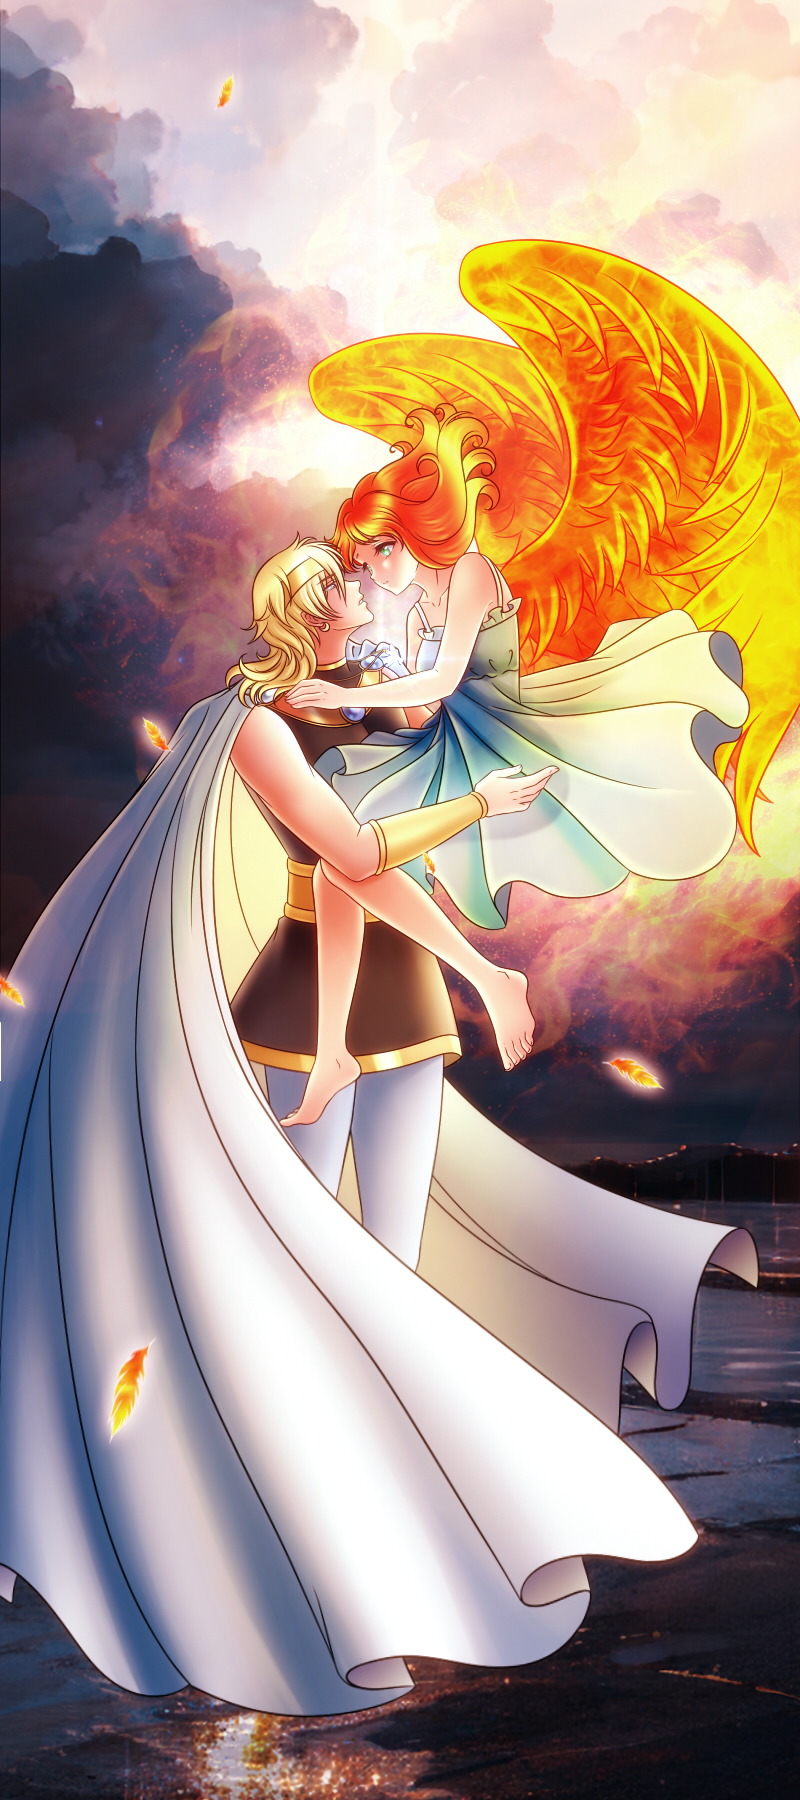 Cupid and Psyche by lilifane on DeviantArt